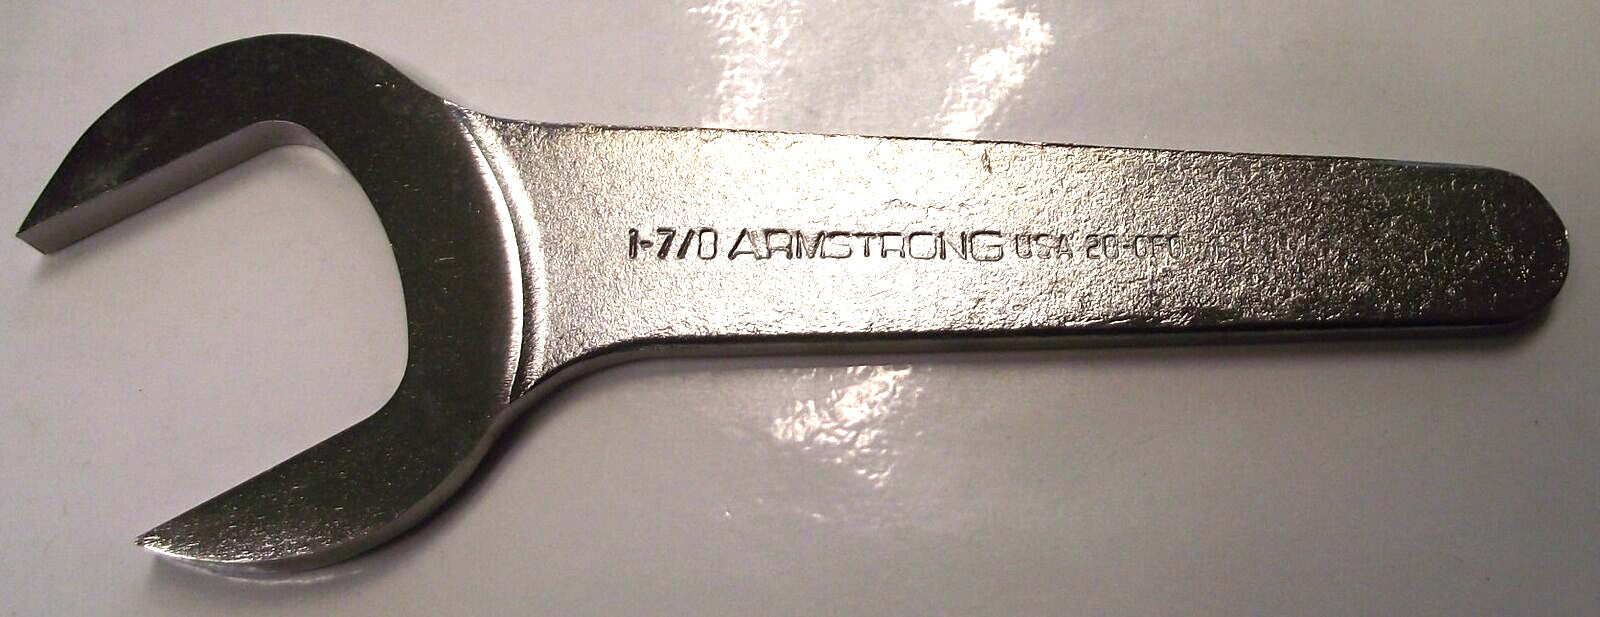 ARMSTRONG TOOLS 28-060 1-7/8" Open End Pump Wrench Thin Pattern USA